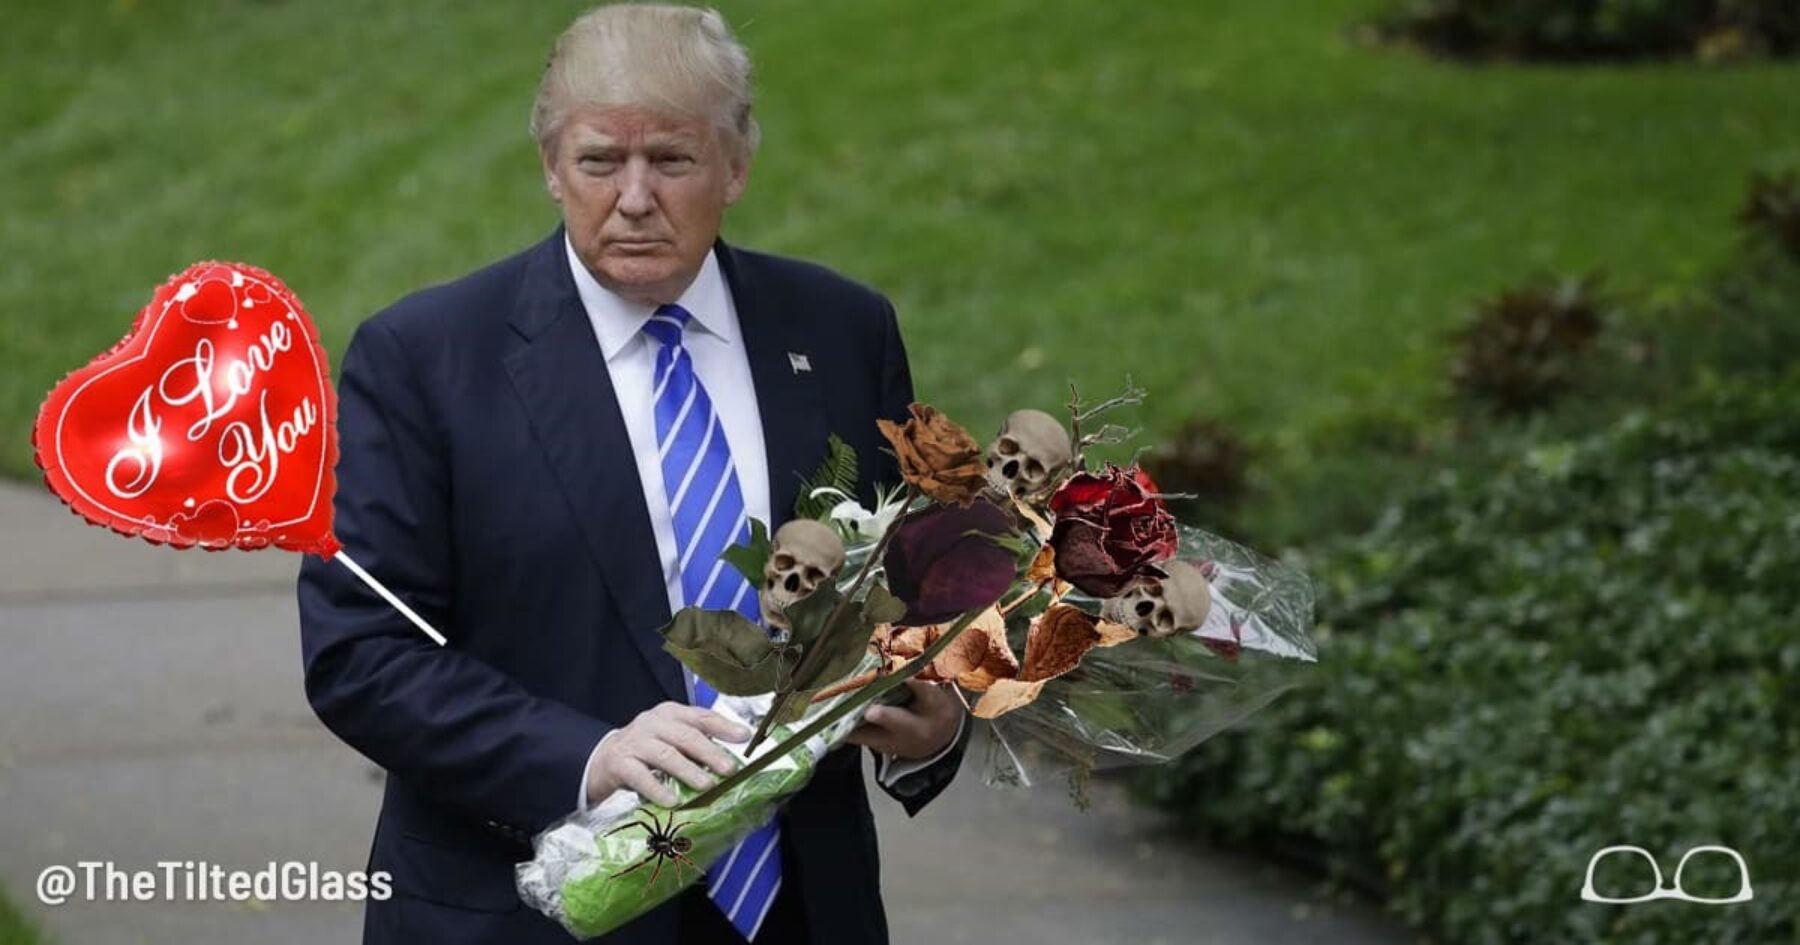 I Got You These Flowers But They Died, By Donald Trump